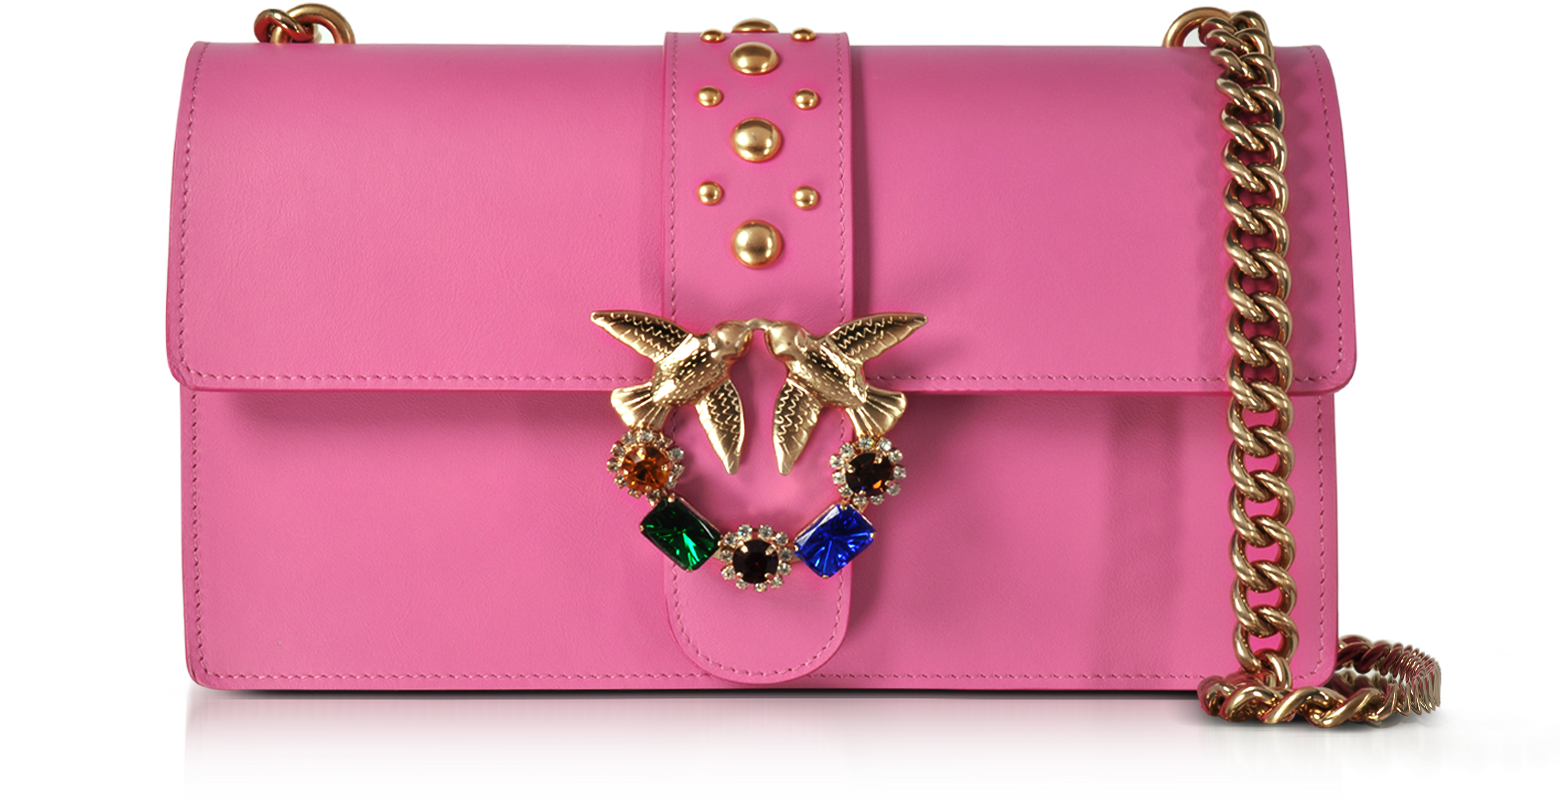 Pinko Love Pink Jeweled Leather Shoulder Bag at FORZIERI UK